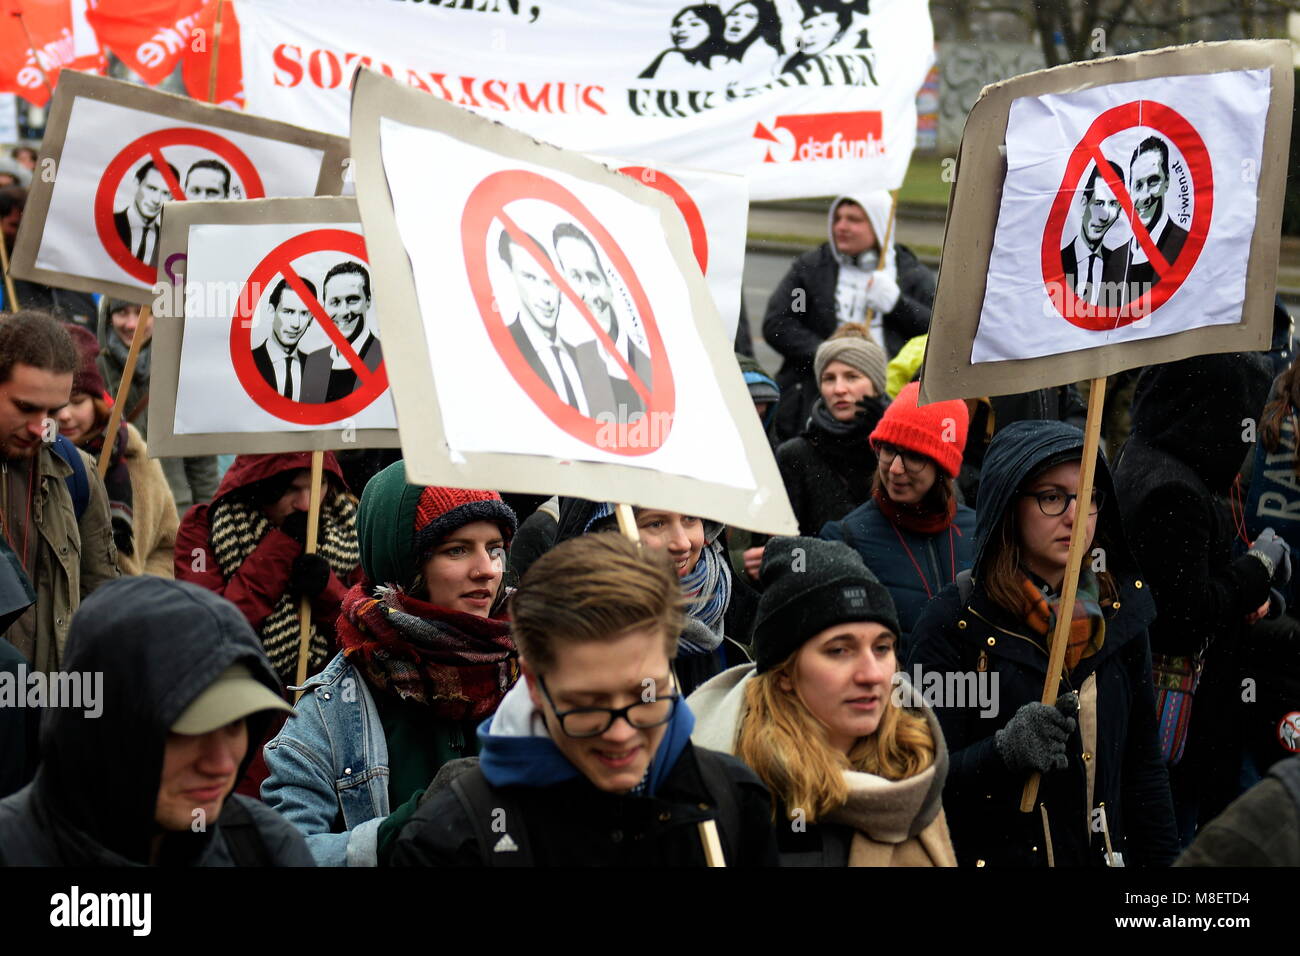 Vienna, Austria. March 17, 2018. Mass demonstration against racism and fascism in Vienna. The demonstration, like the previous mass demonstration on January 13, 2018. Credit: Franz Perc/Alamy Live News Stock Photo